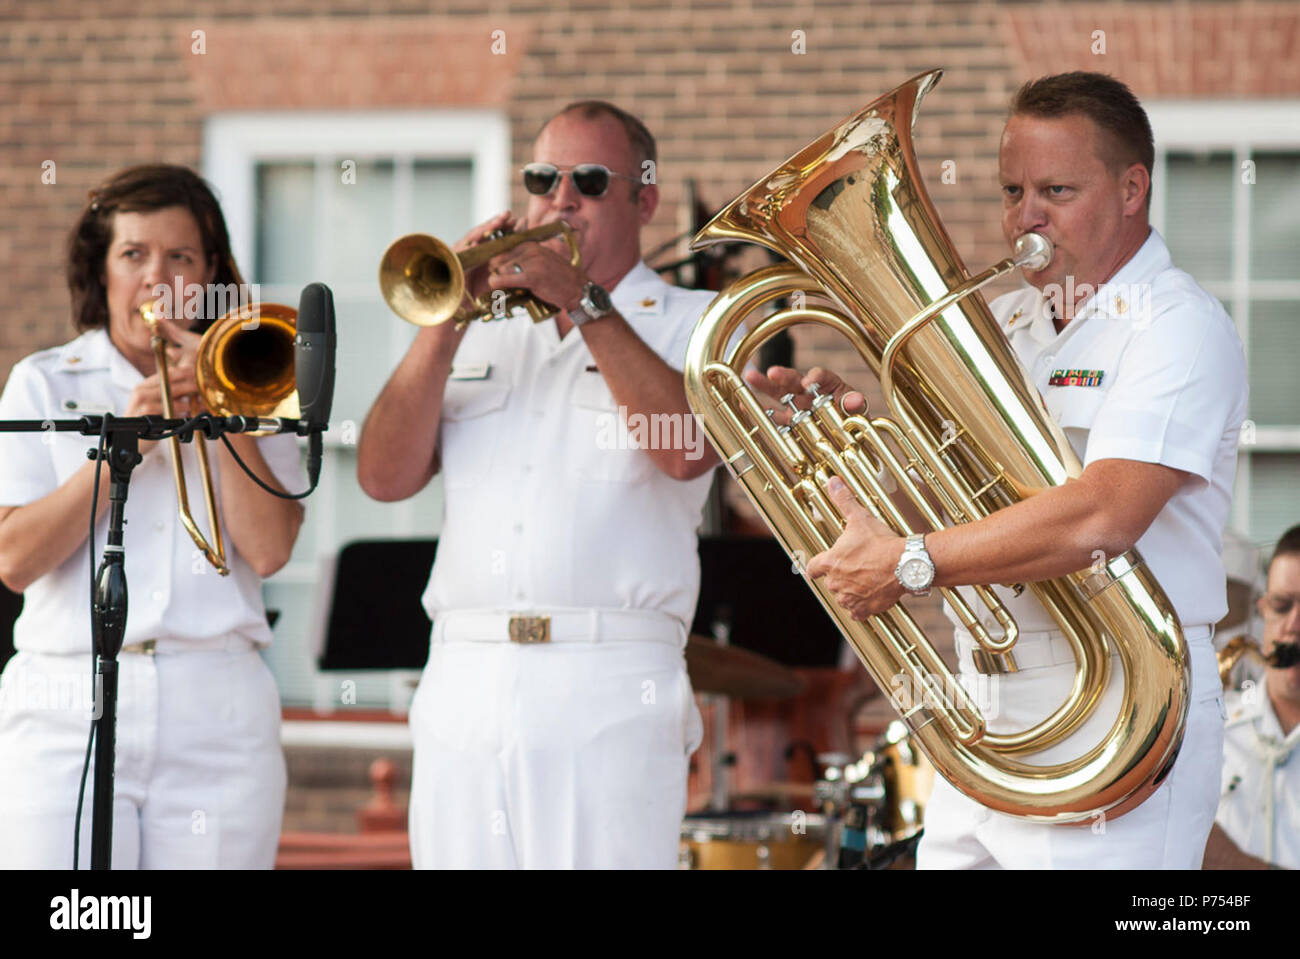 ALEXANDRIA, Va. (August 28, 2015) Chief Musician Jen Krupa, Musician 1st Class Tim Stanley, and Senior Chief Musician Matt Neff take center stage with the United States Navy Band Commodores jazz ensemble at Market Square in Old Town. The Commodores play free public concerts throughout the year. Stock Photo